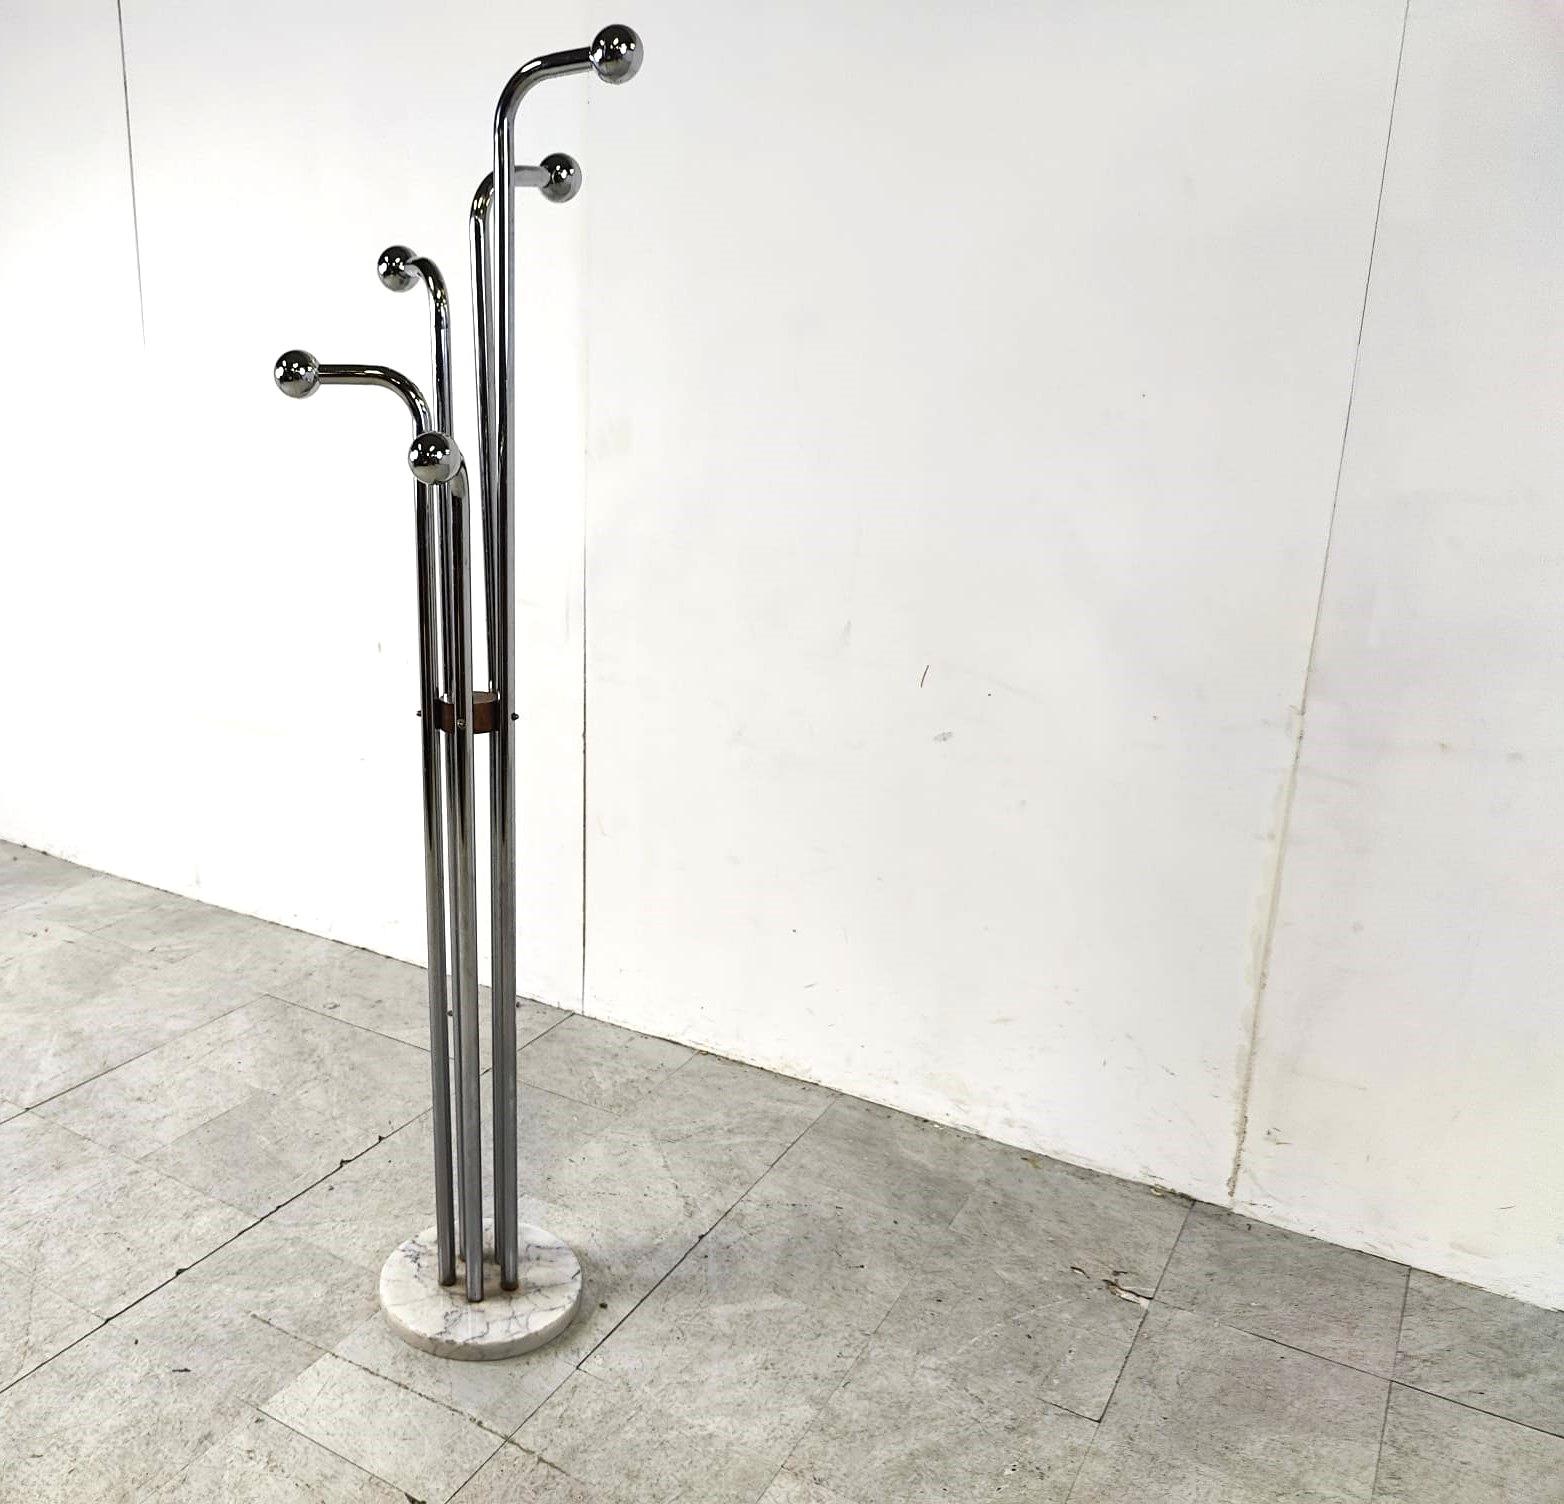 Mid century chrome  sputnik coat stand.

Space age design.

Lots of practical hooks and white marble base

1960s - France

Good condition.

Dimensions:
Height: 170cm
Diameter: 46cm

Ref.: 301951